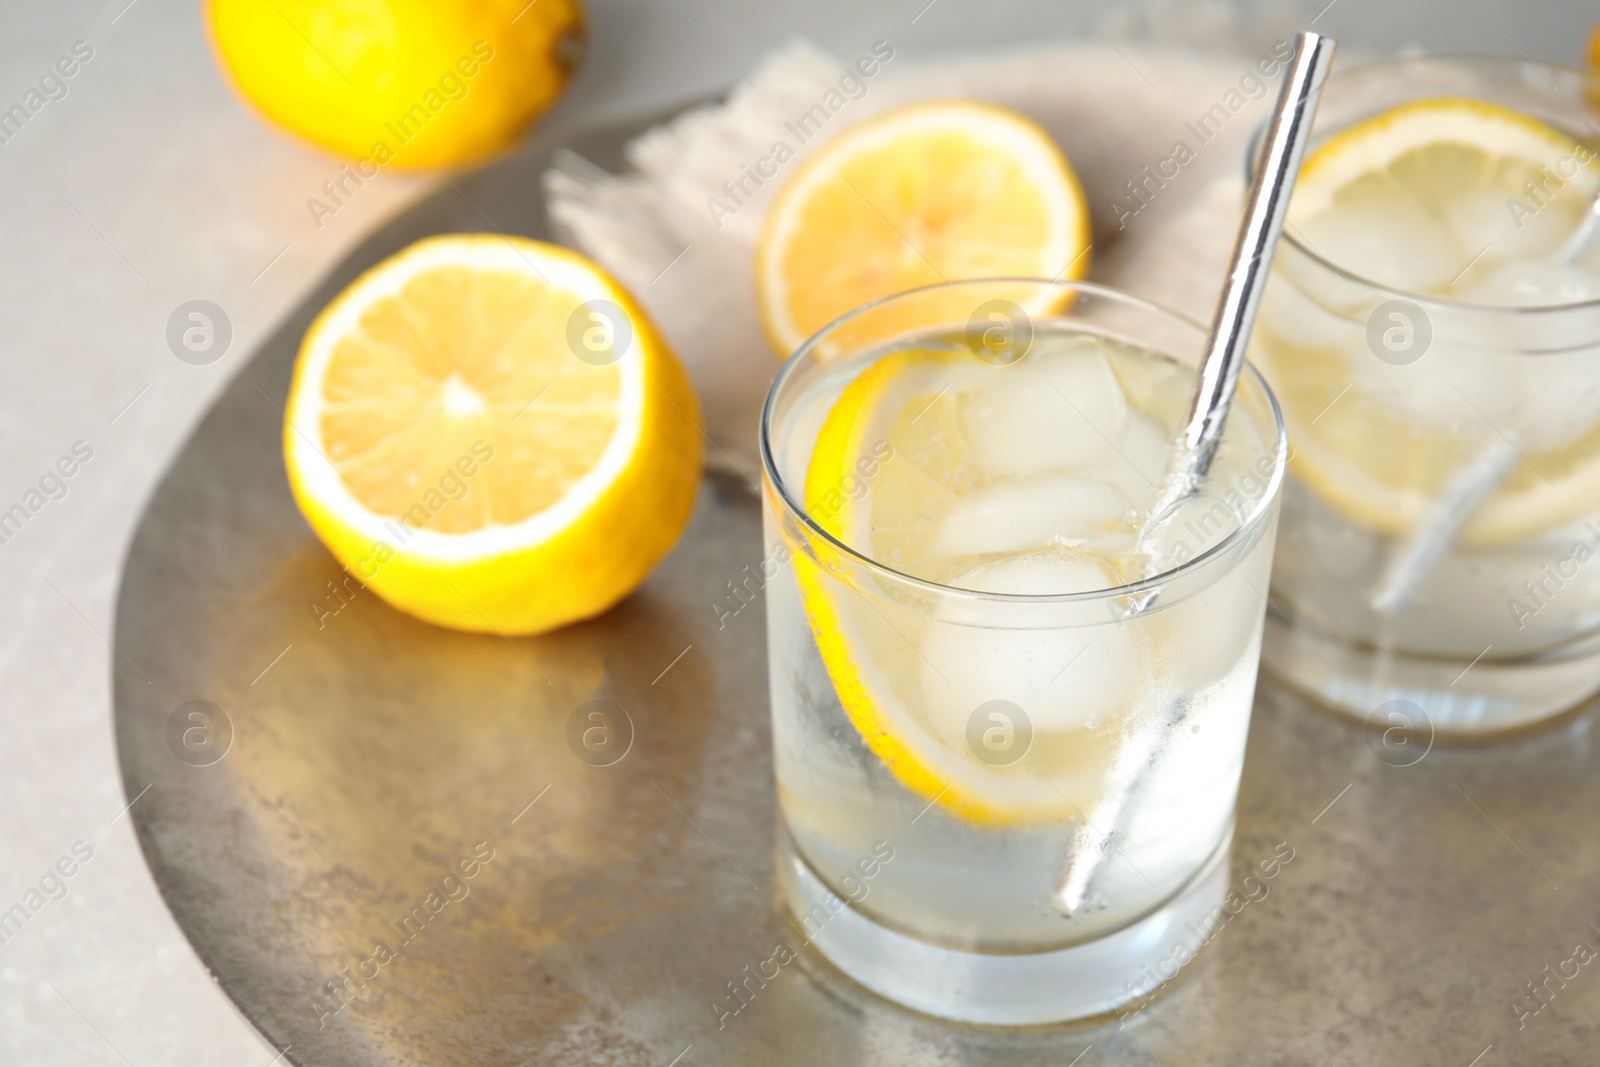 Photo of Soda water with lemon slices and ice cubes on silver tray